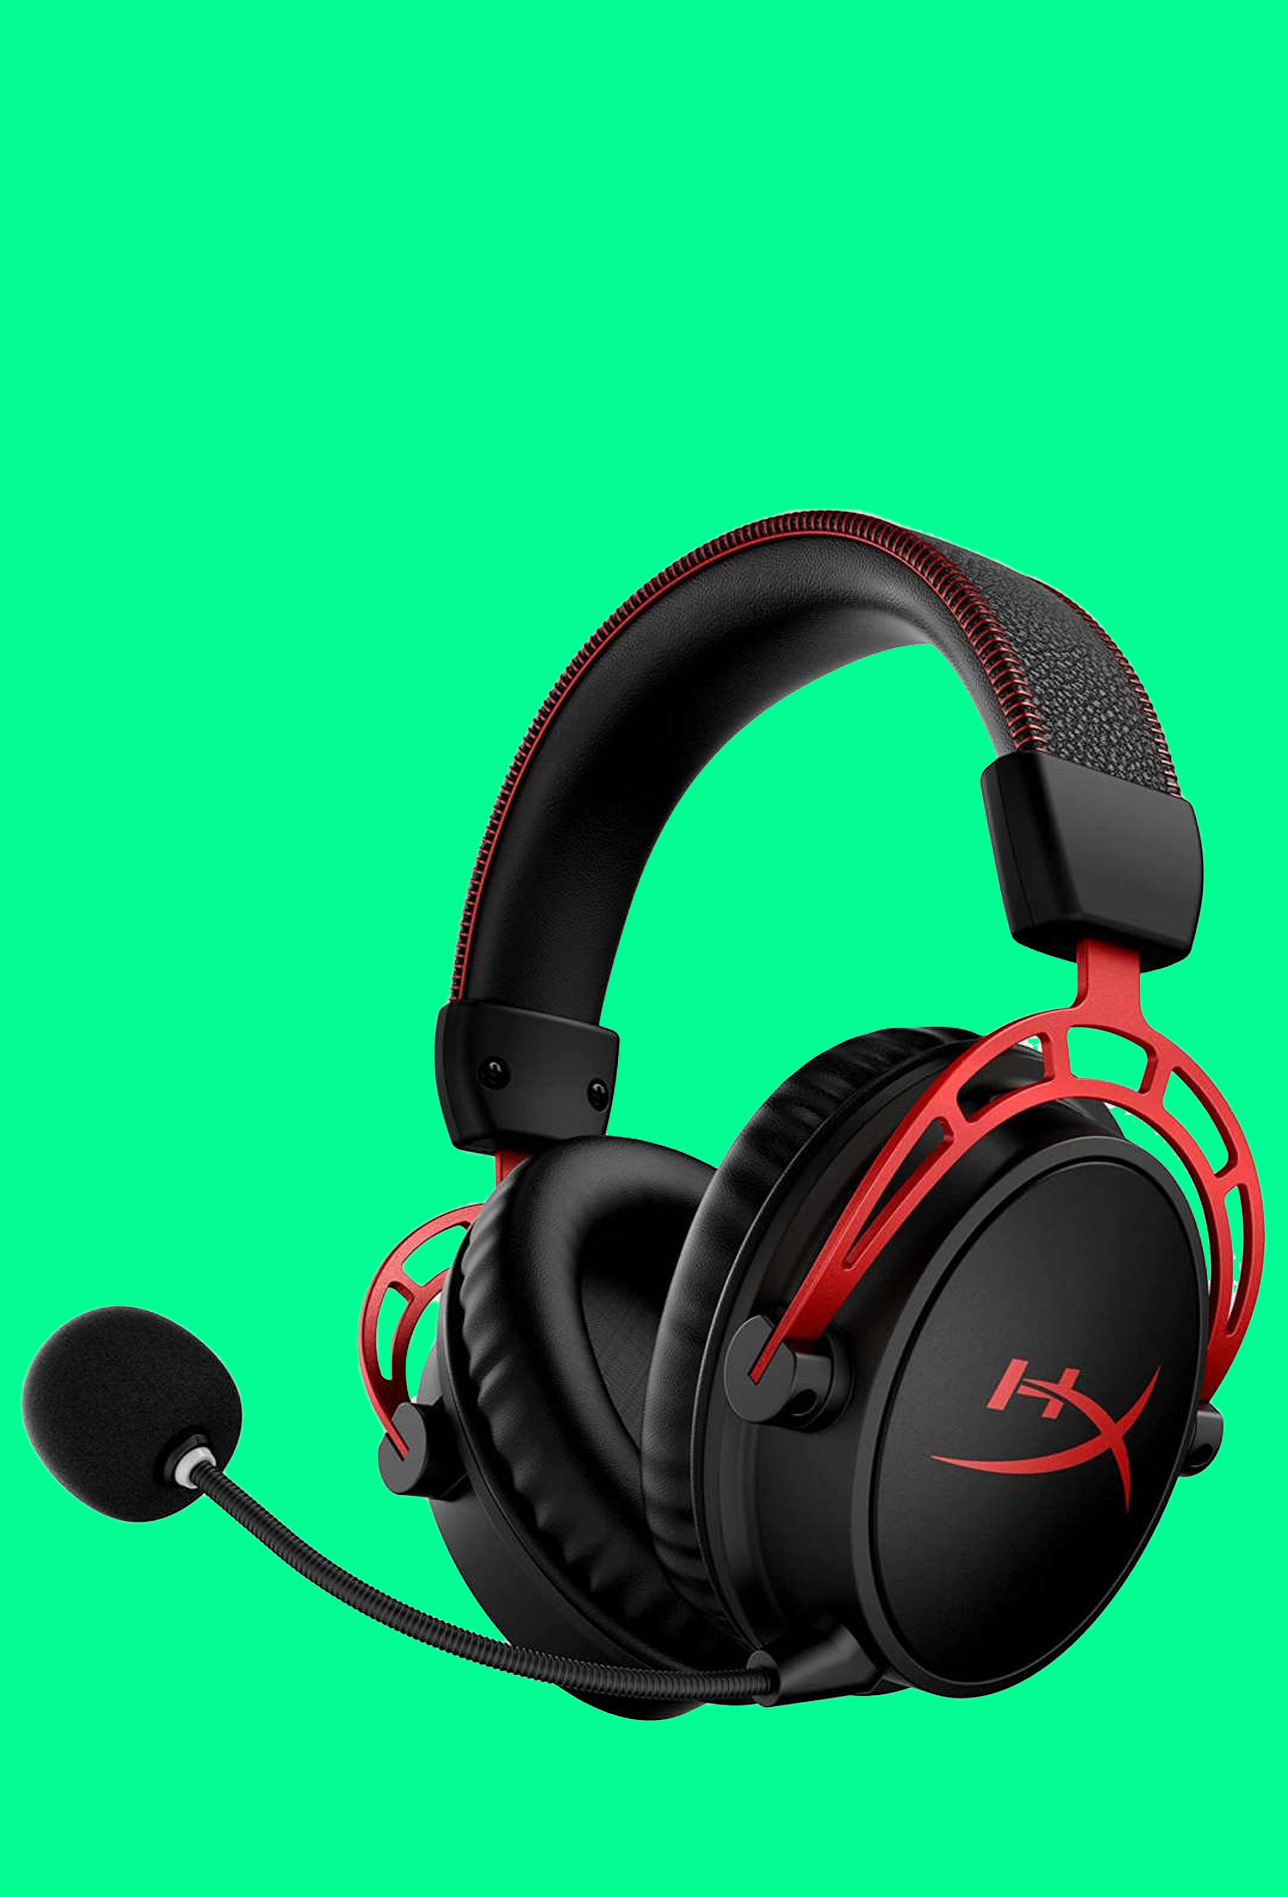 Best gaming headsets in 2023: I'd bet my ears on these headphones